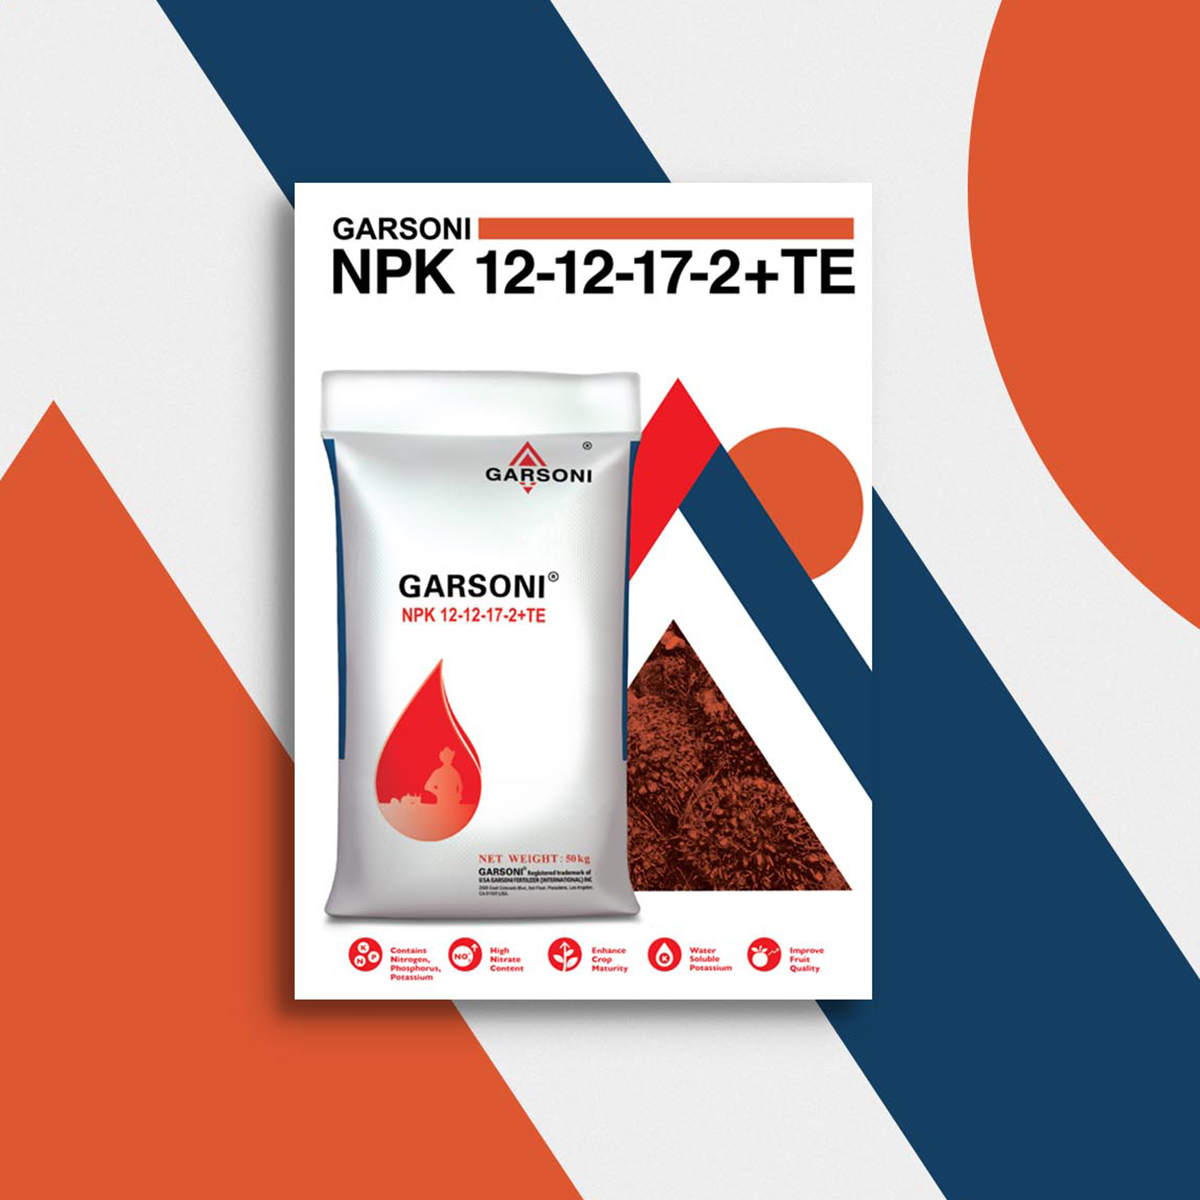 Garsoni flyer design with new art direction for the brand featuring bold graphics and product packaging and crafted icons 